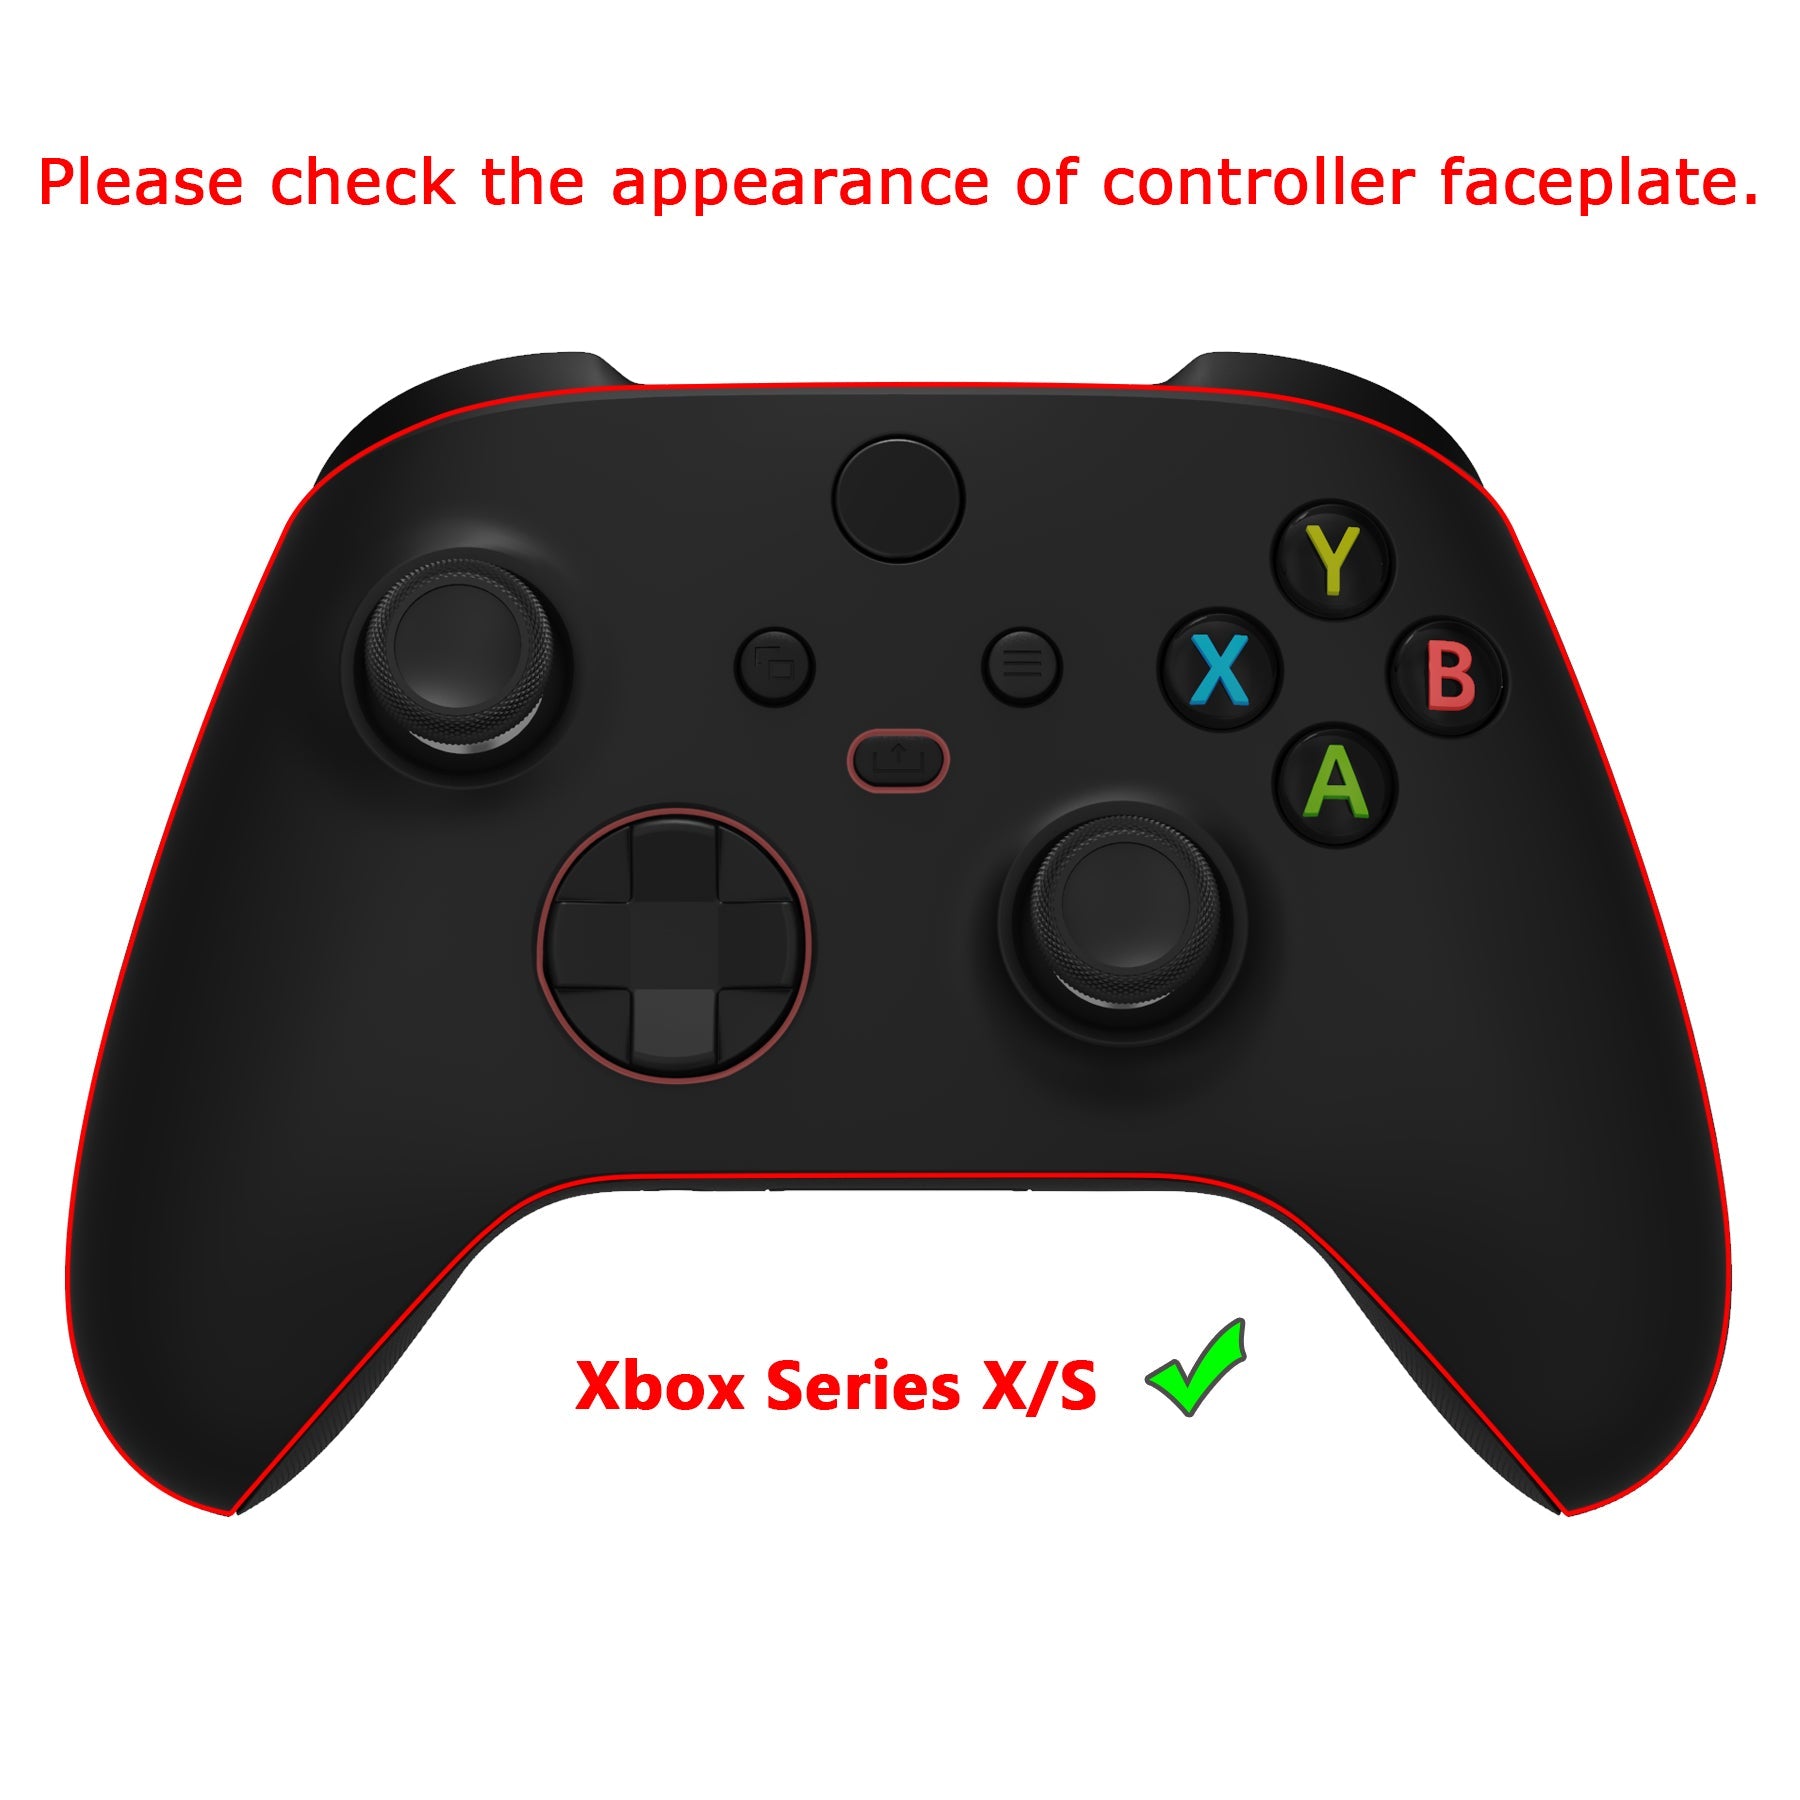 eXtremeRate Retail Heaven Blue Touch Grip Back Panels, Comfortable Non-Slip Side Rails Handles, Game Improvement Replacement Parts for Xbox Series S / X Controller - Controller NOT Included - PX3P313